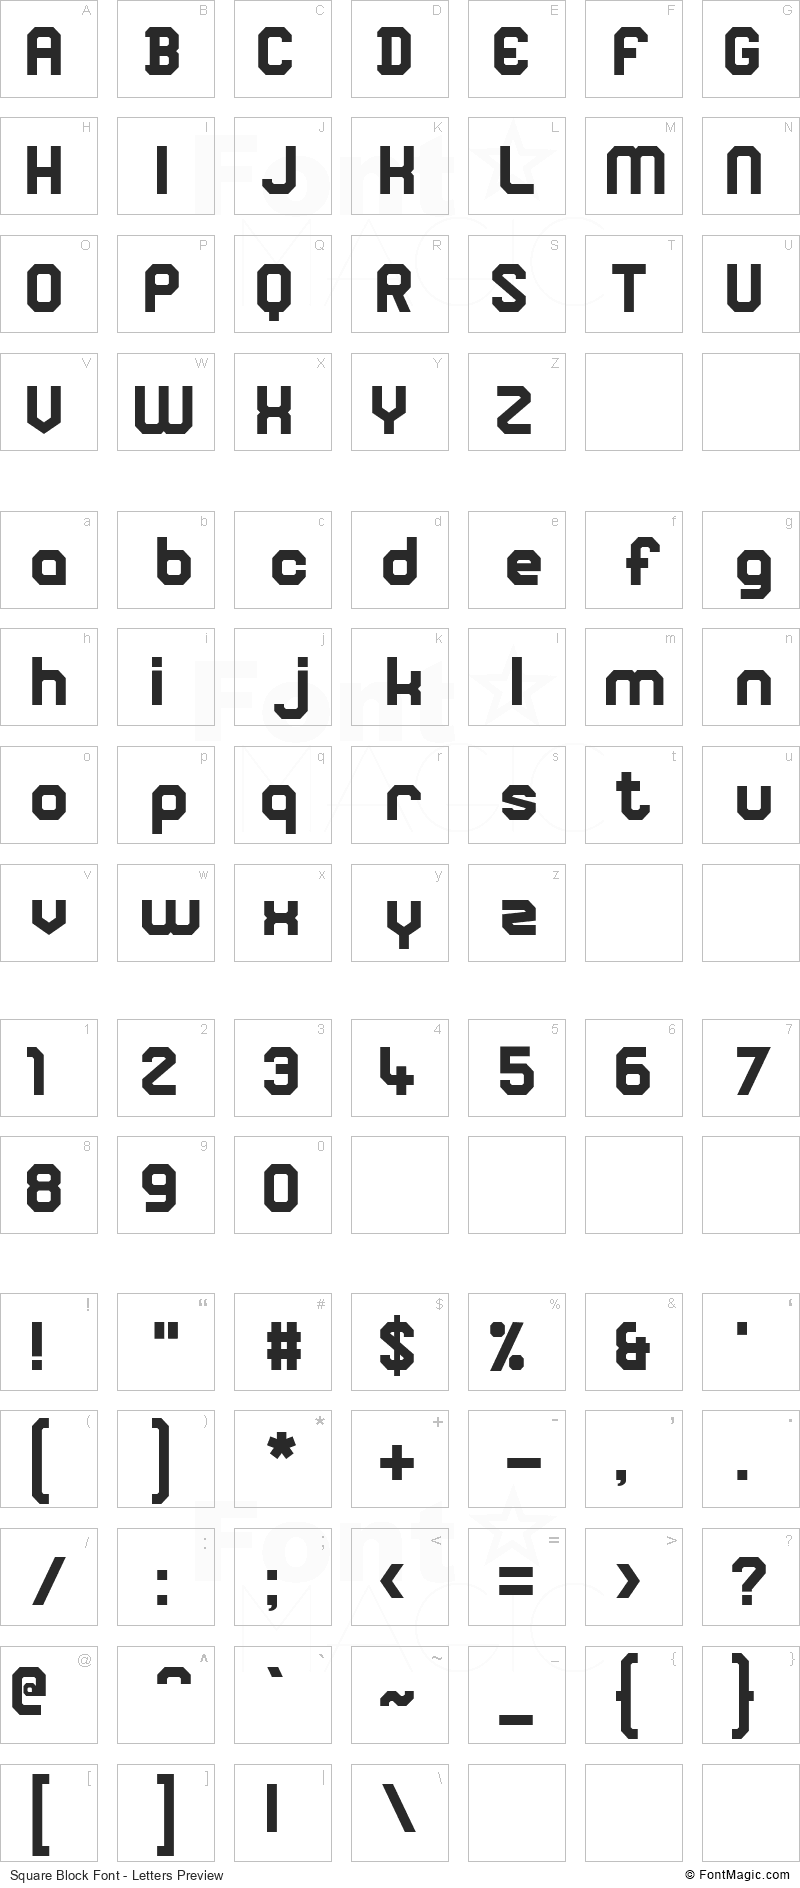 Square Block Font - All Latters Preview Chart